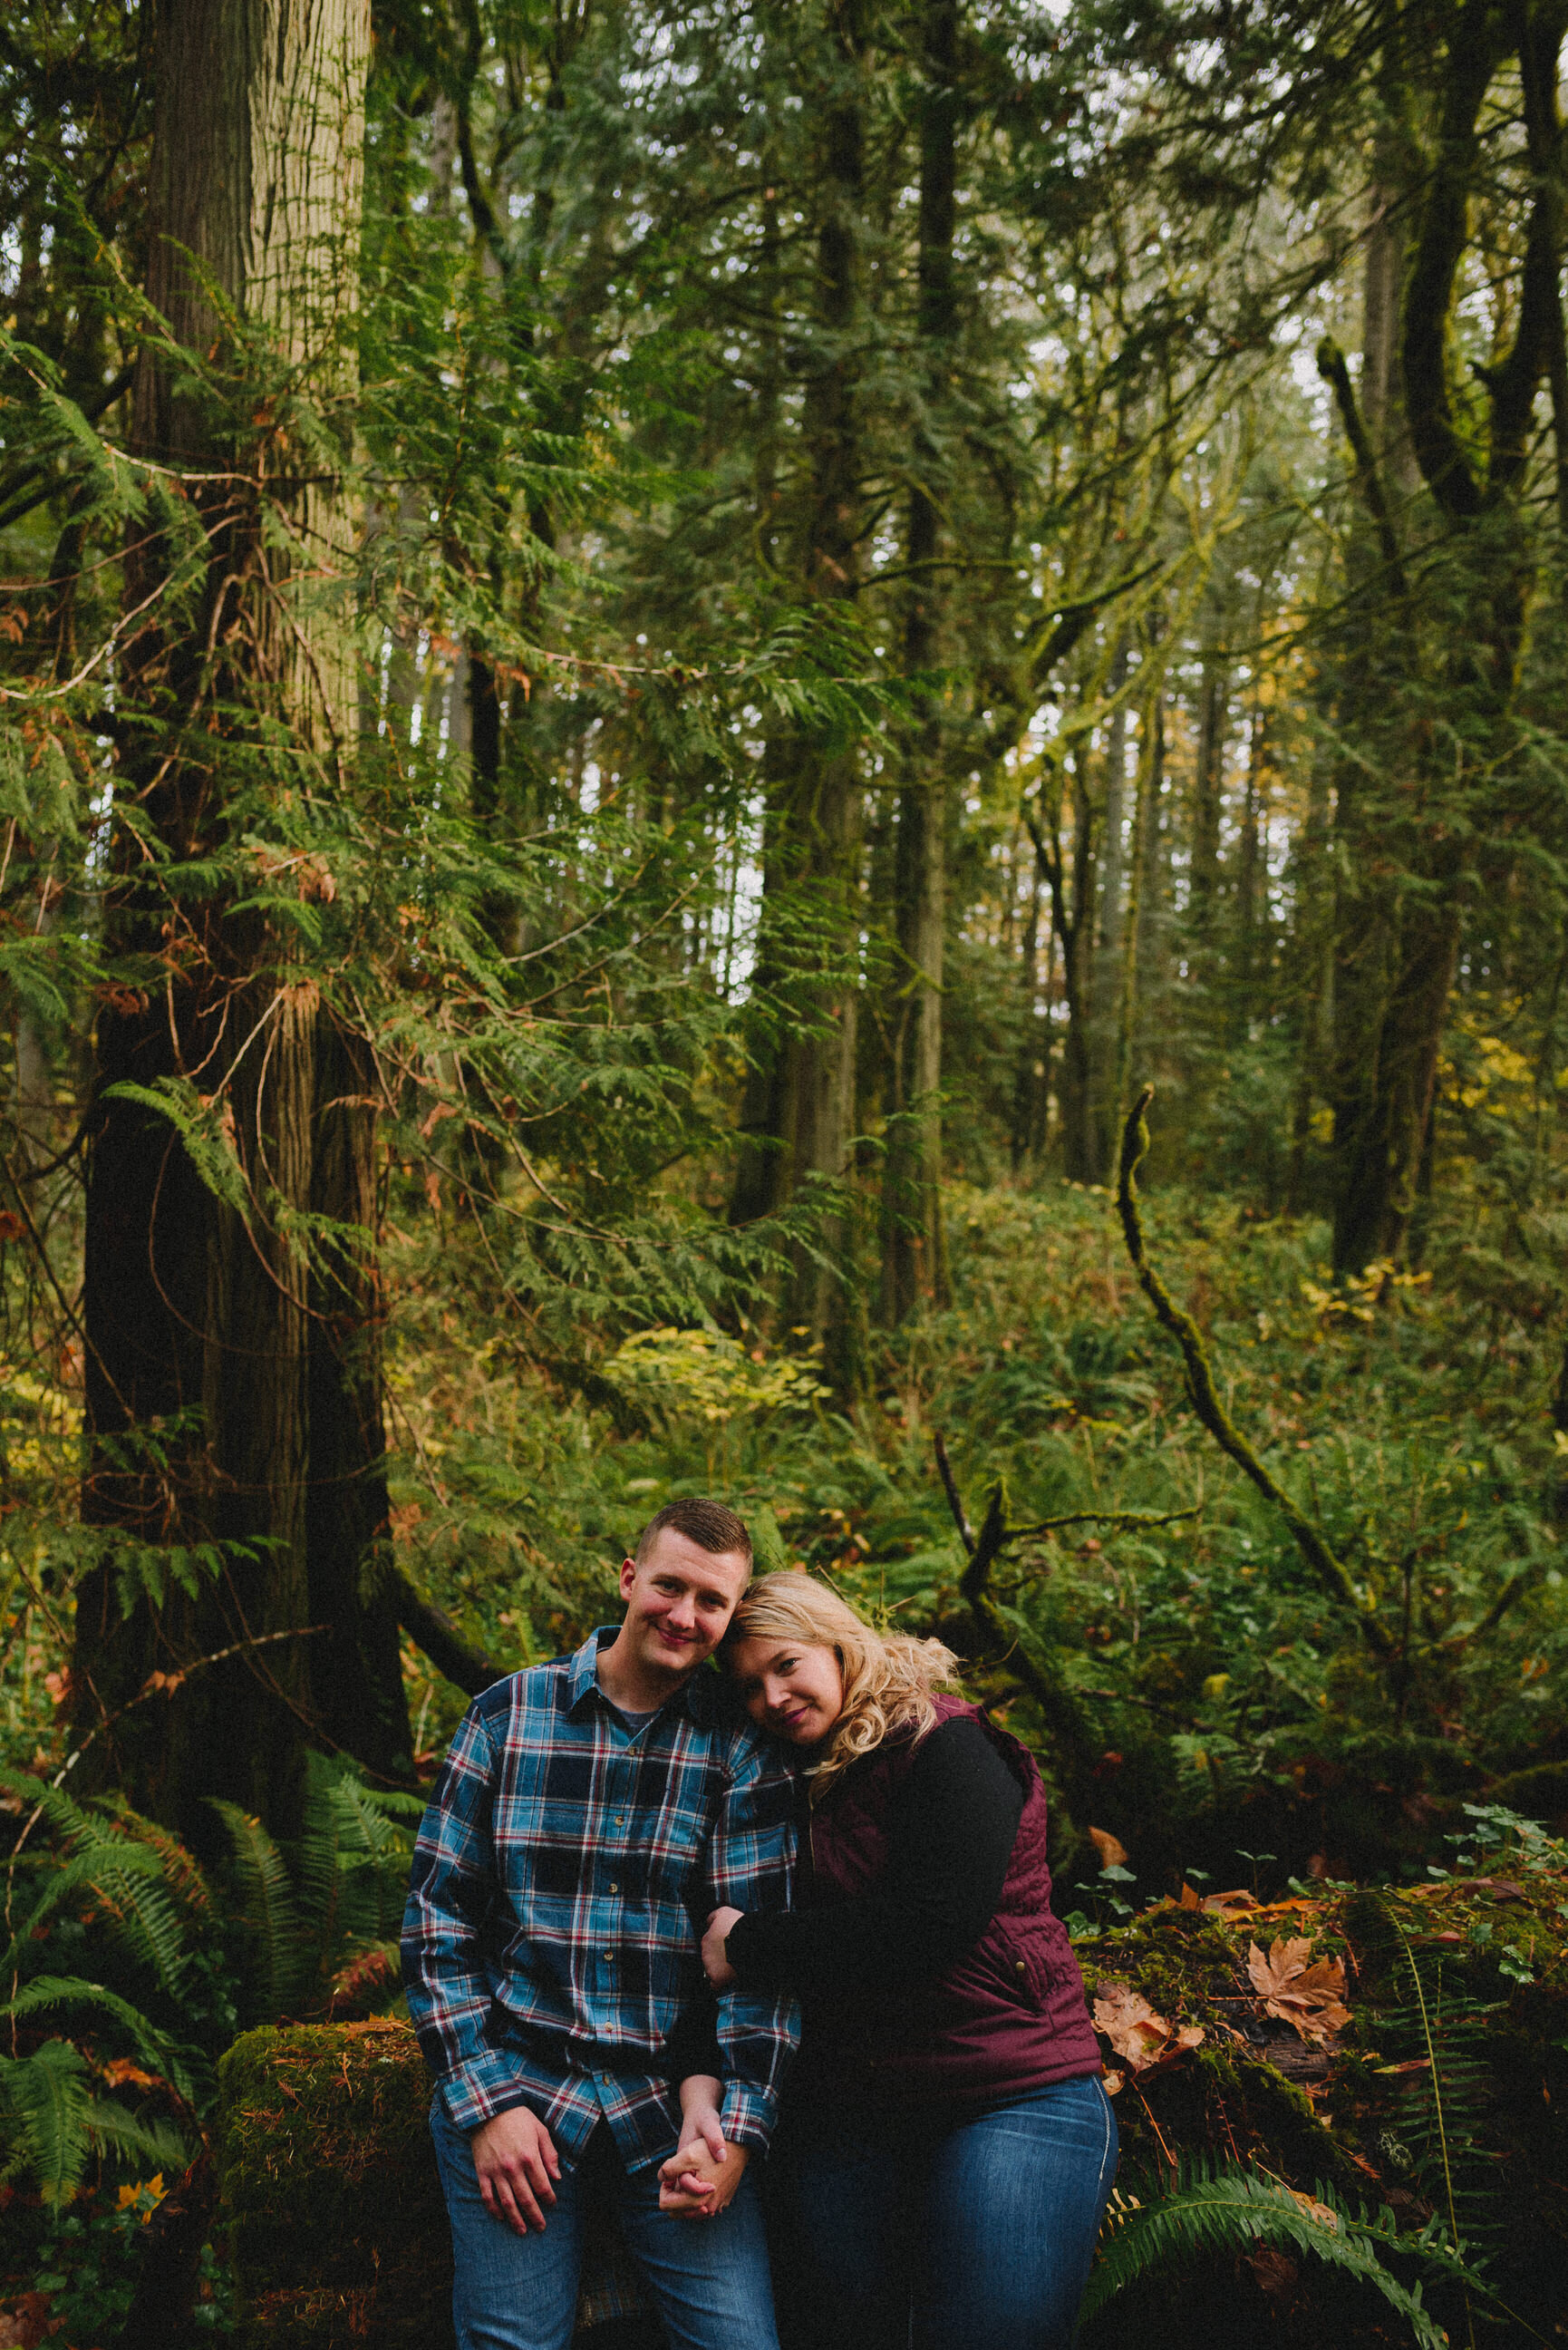 priest-point-park-couples-session-olympia-washington-way-up-north-photography (40).jpg